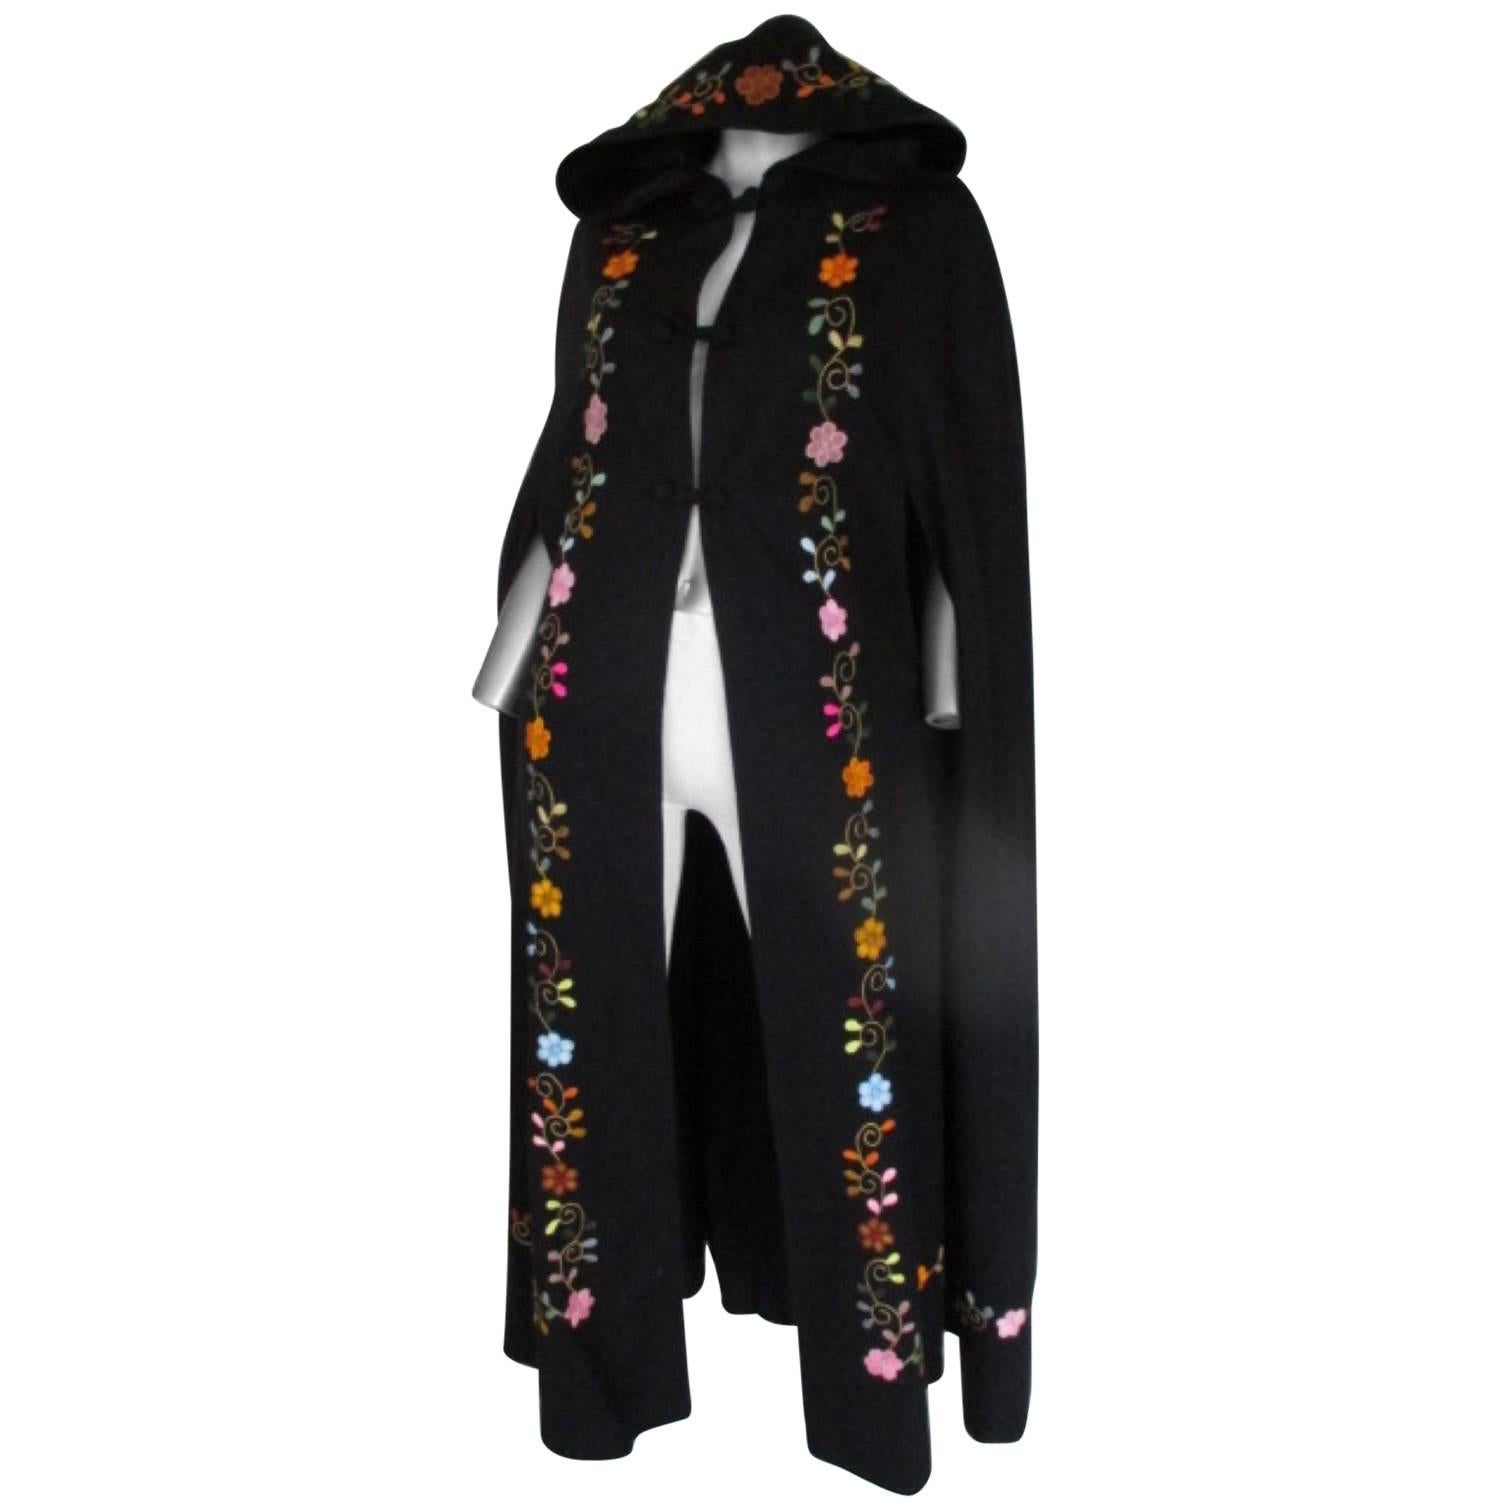 Black Flowers Embroidered Vintage Cape with Hood